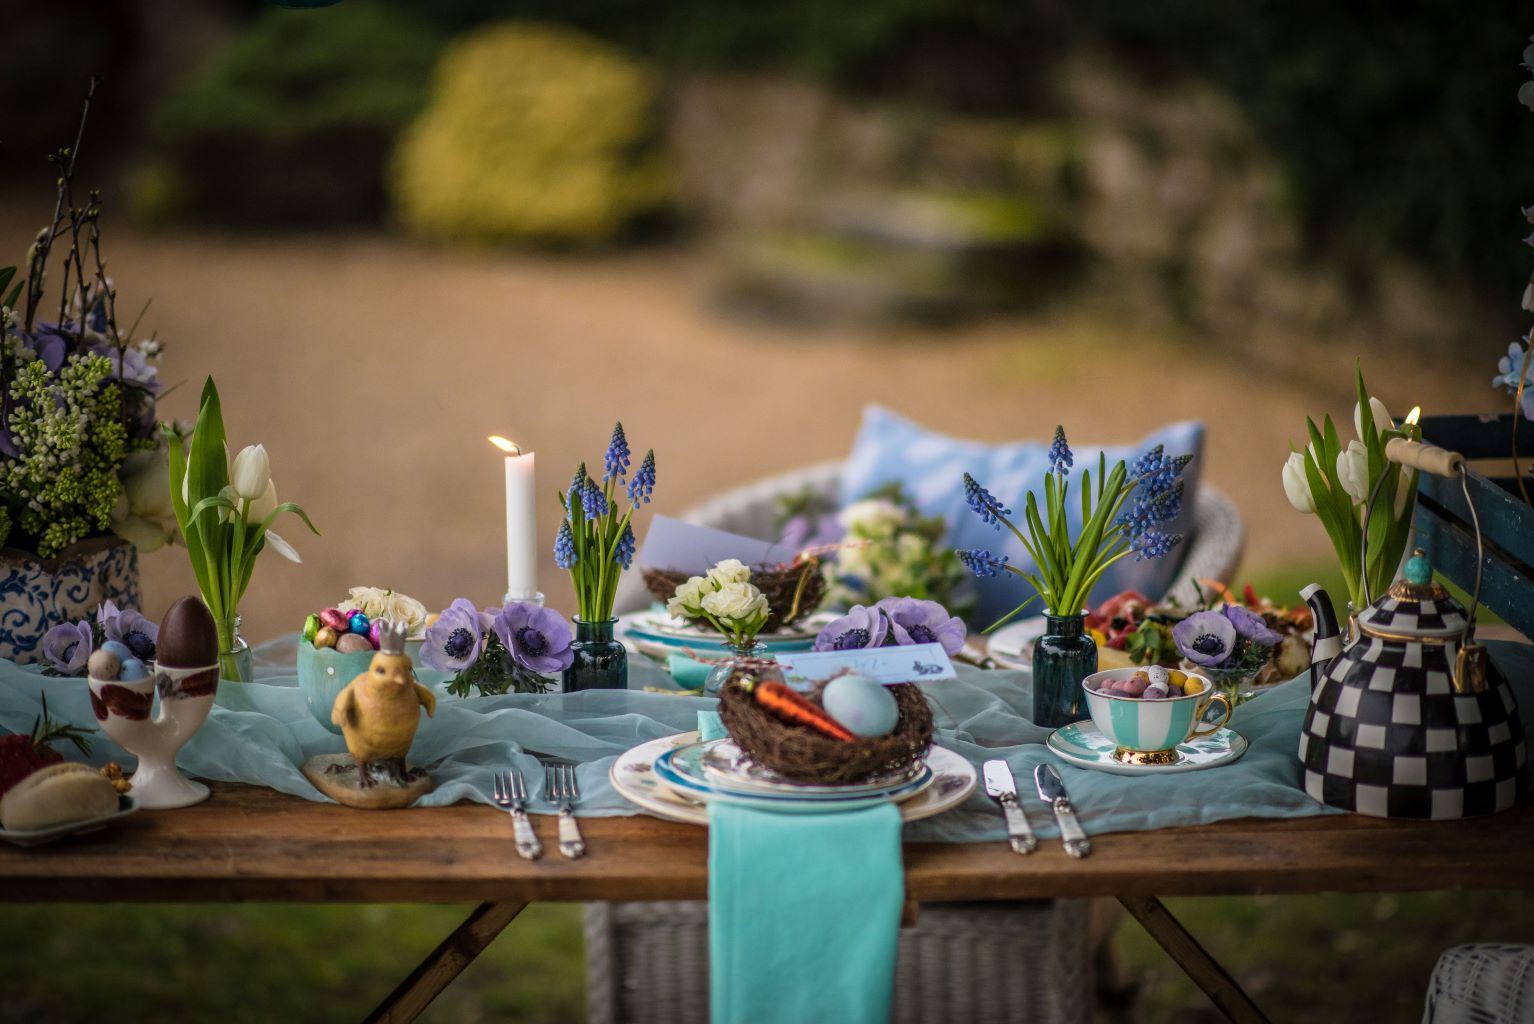 Did you know the best Easter weddings come in small elopement packages?